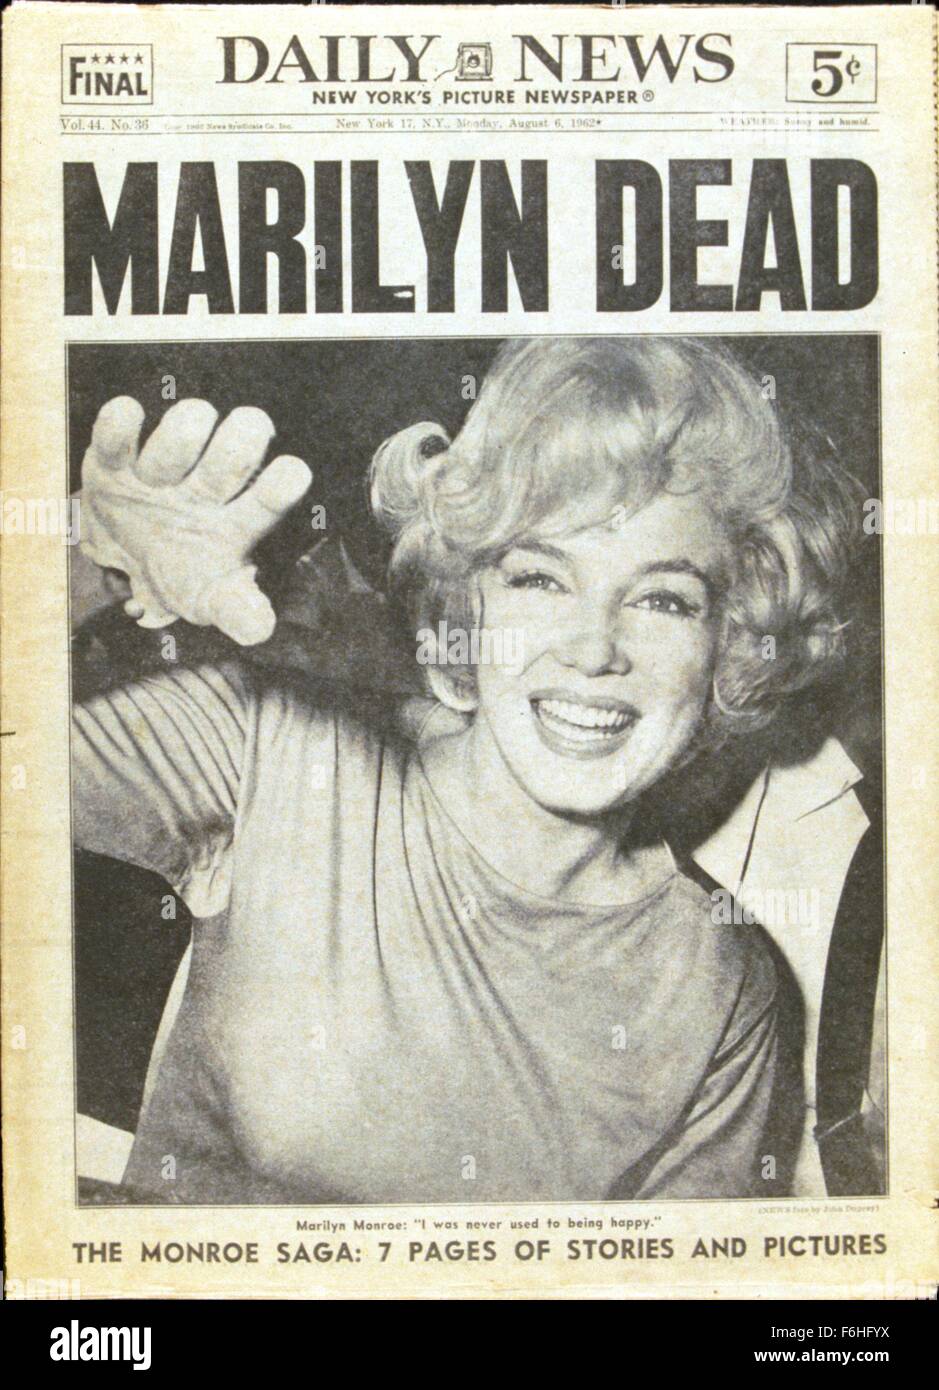 1962 Film Title Daily News New York Pictured Marilyn Monroe Dead Death Newspaper 